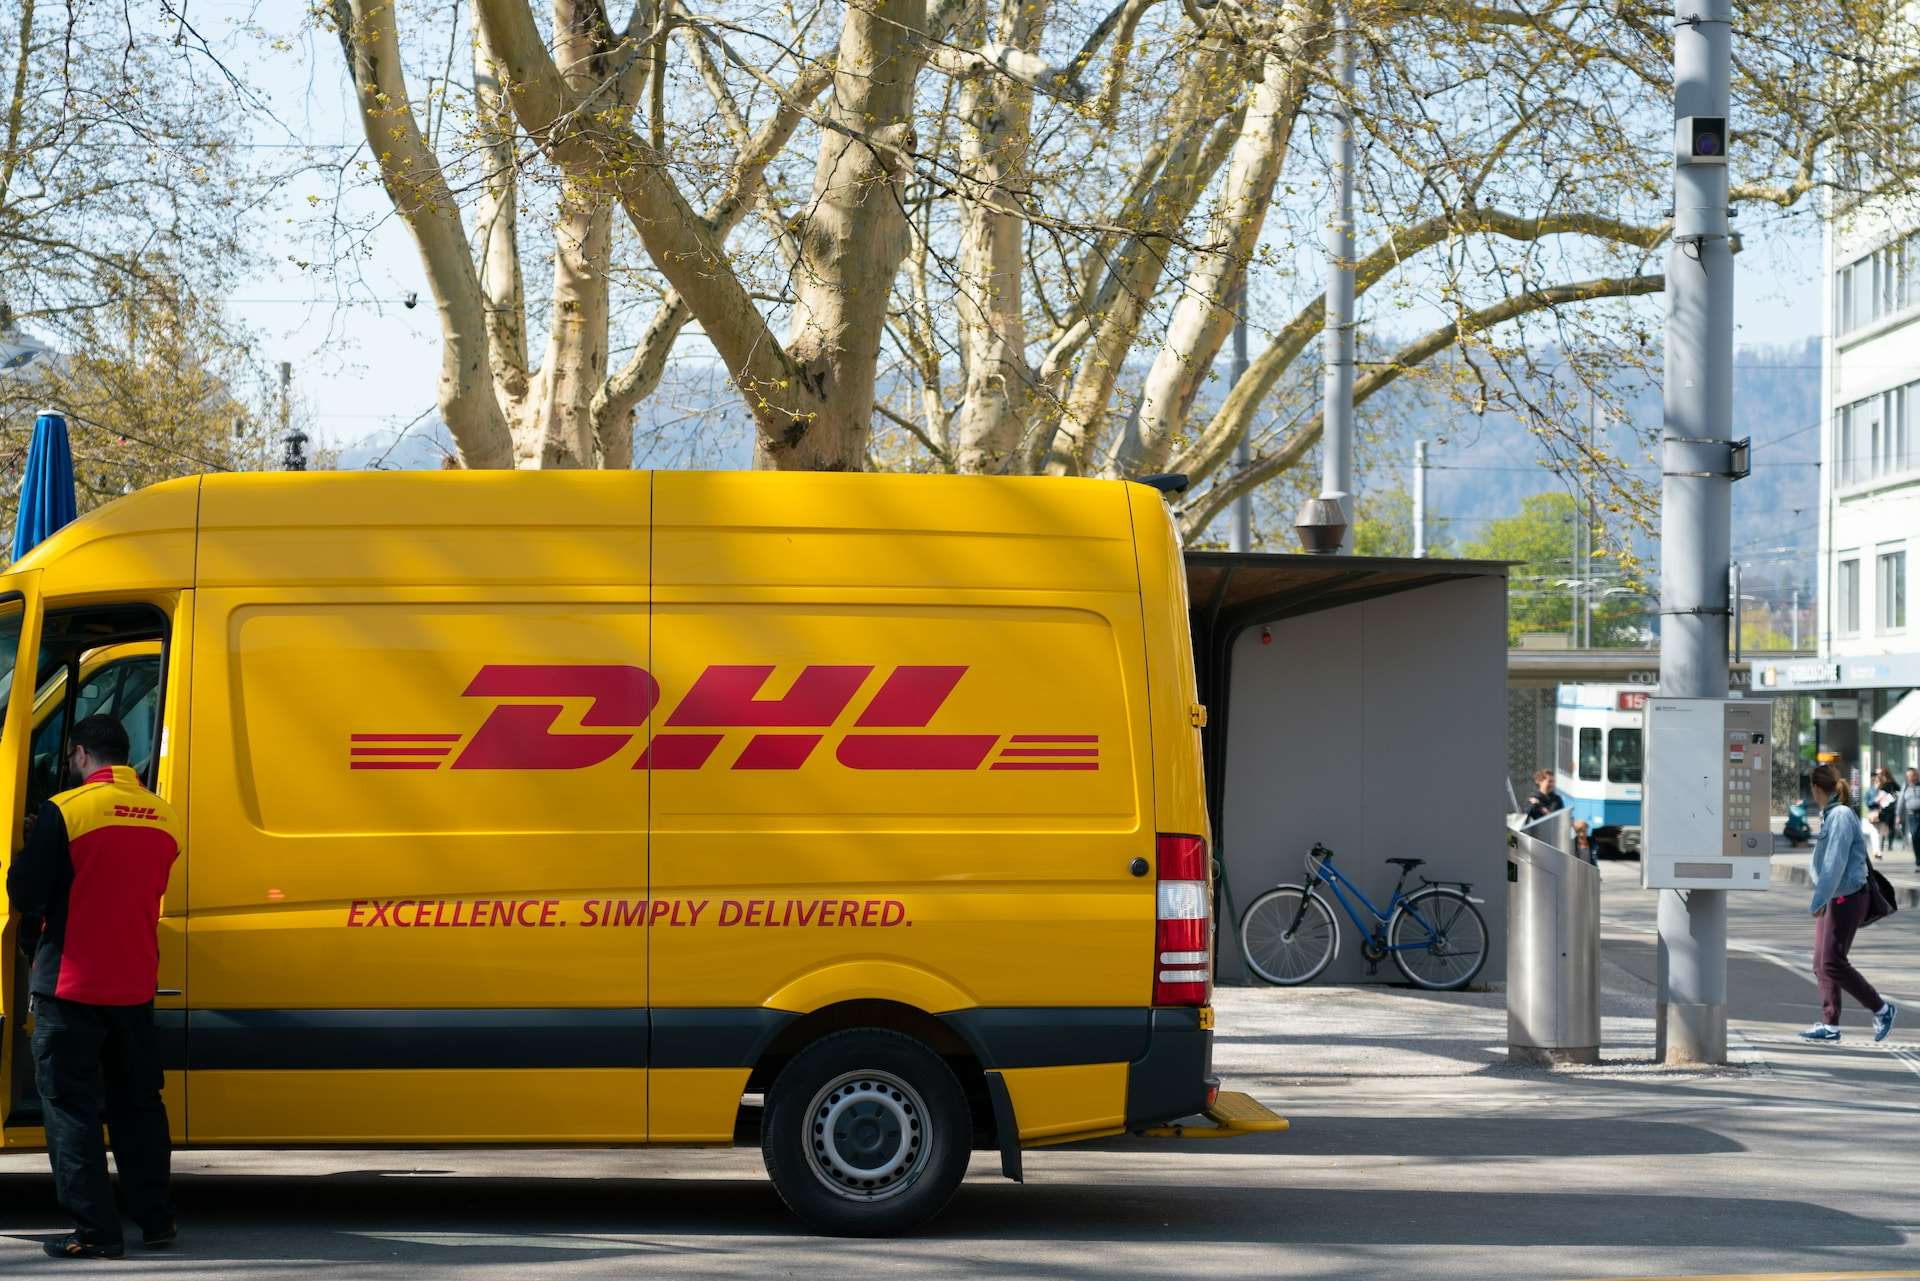 16 Facts About DHL - Facts.net